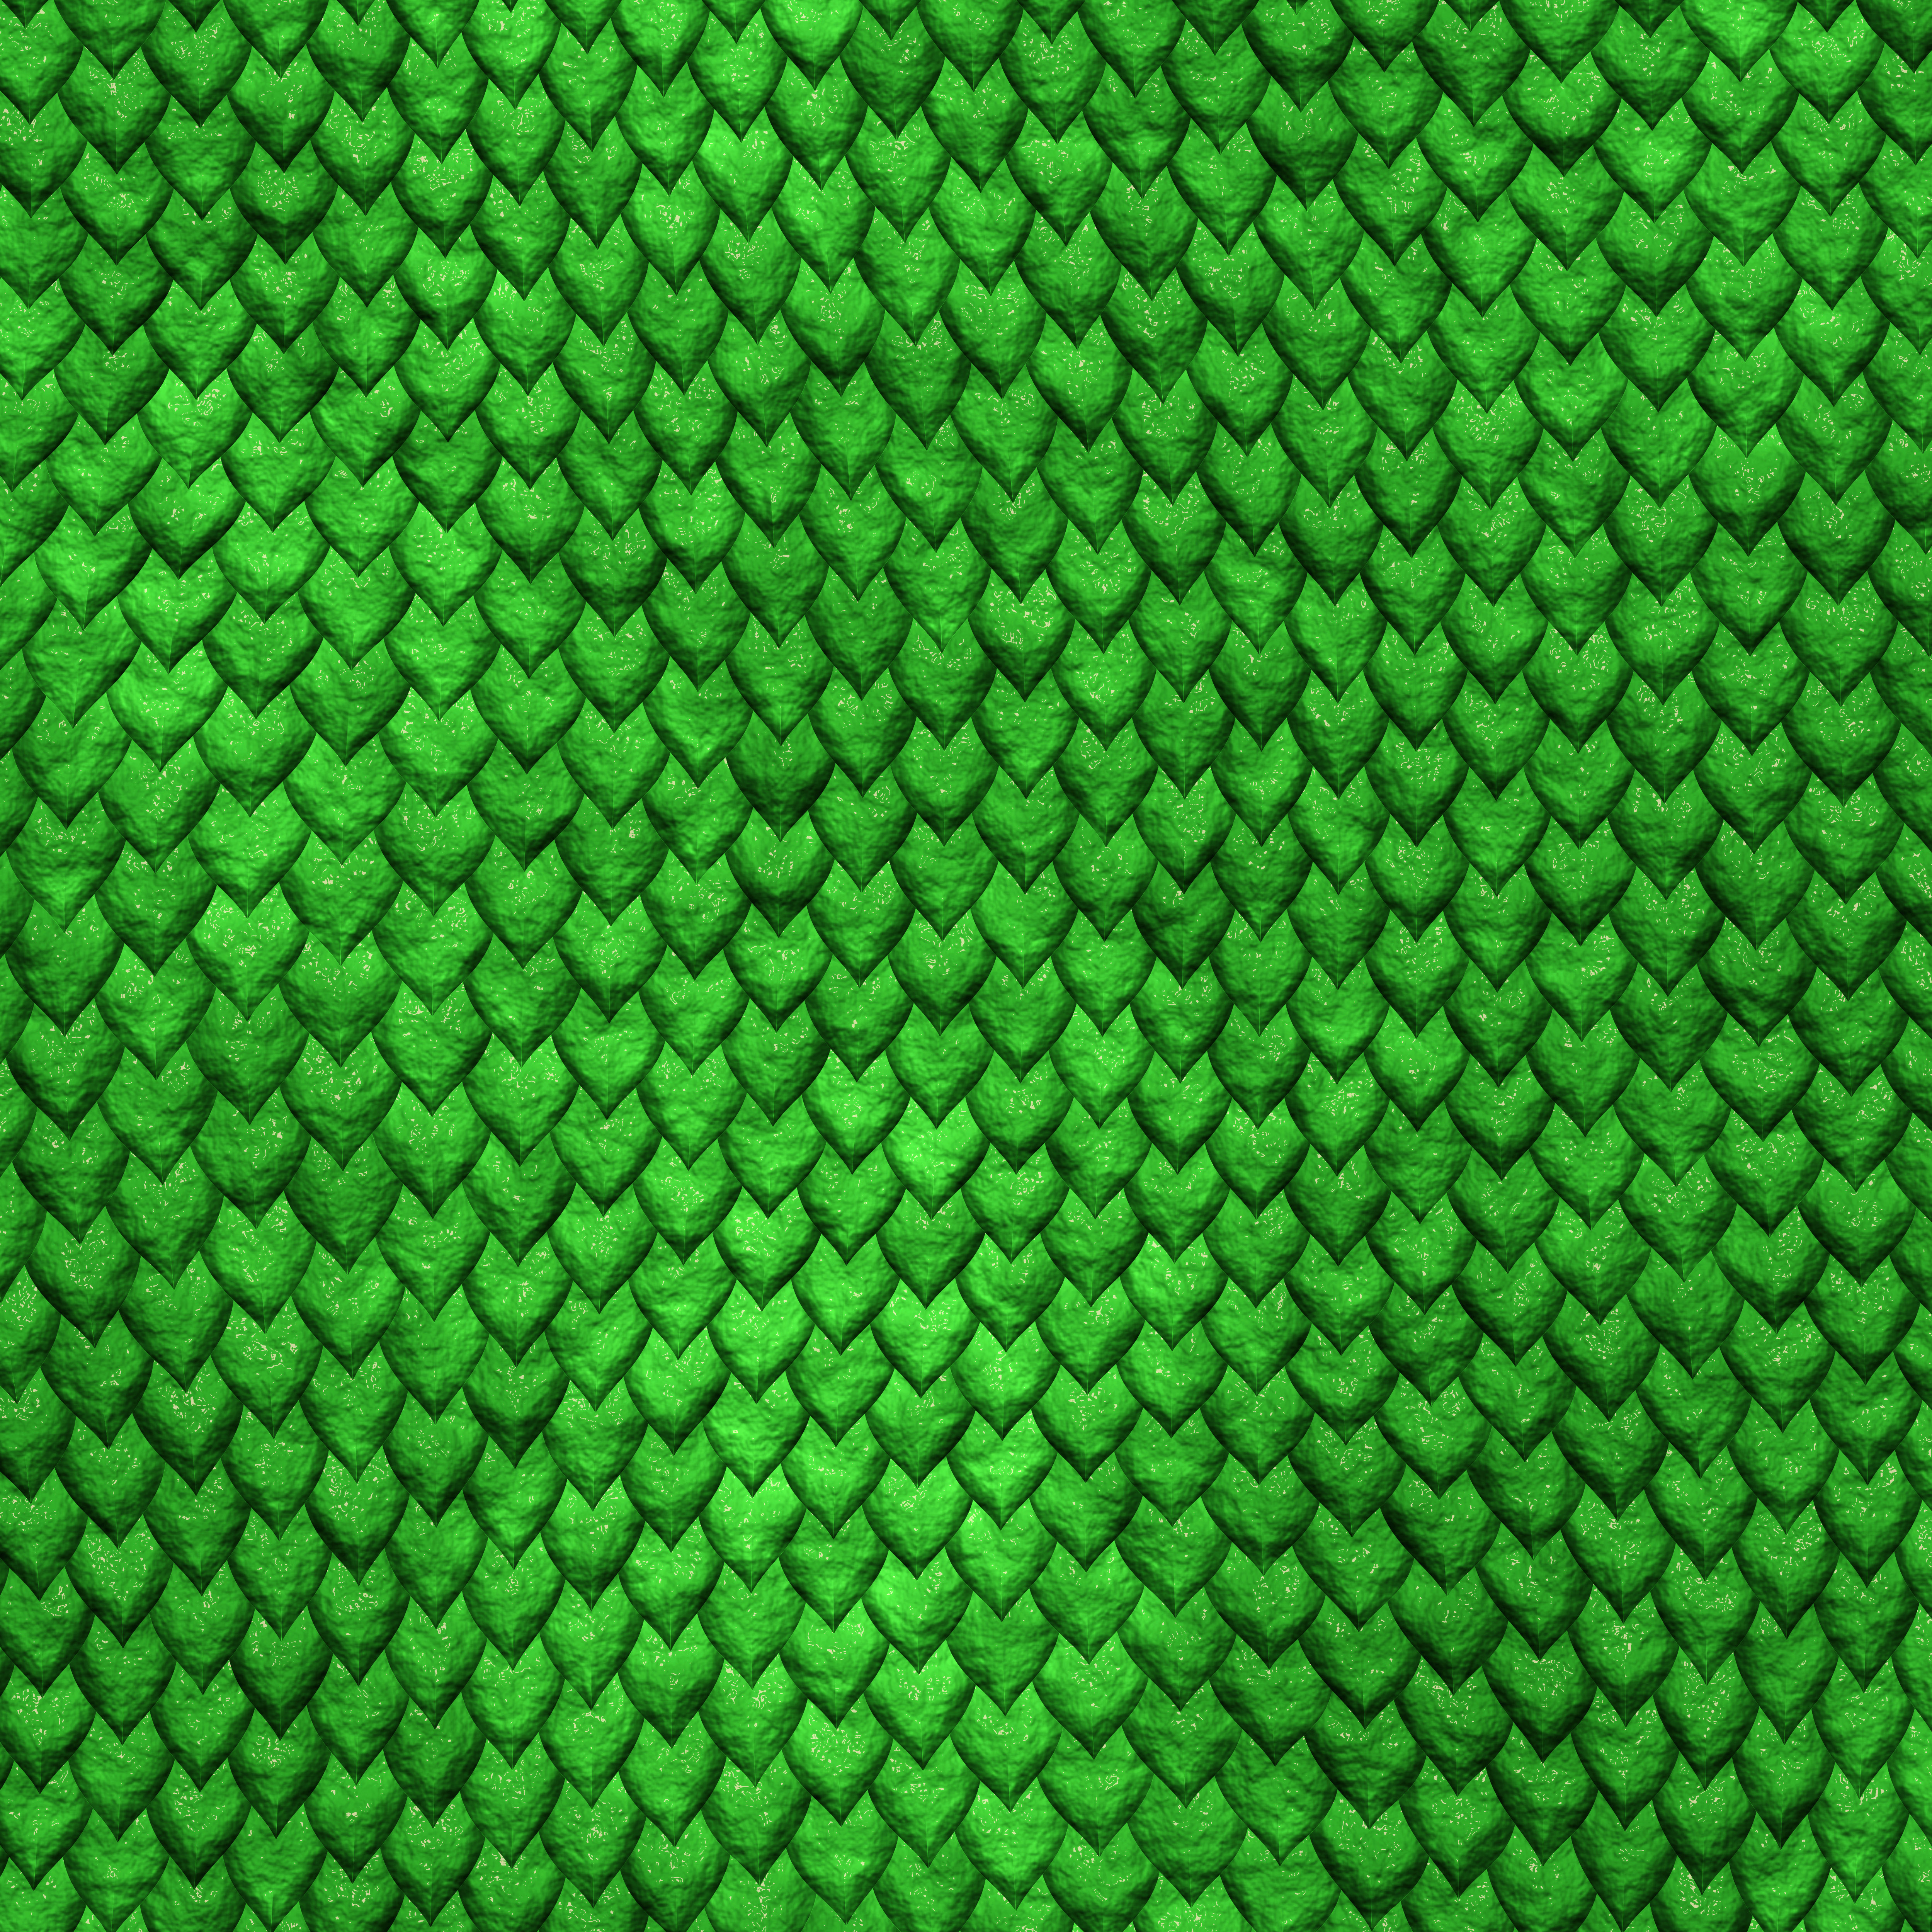 green dragon backgrounds